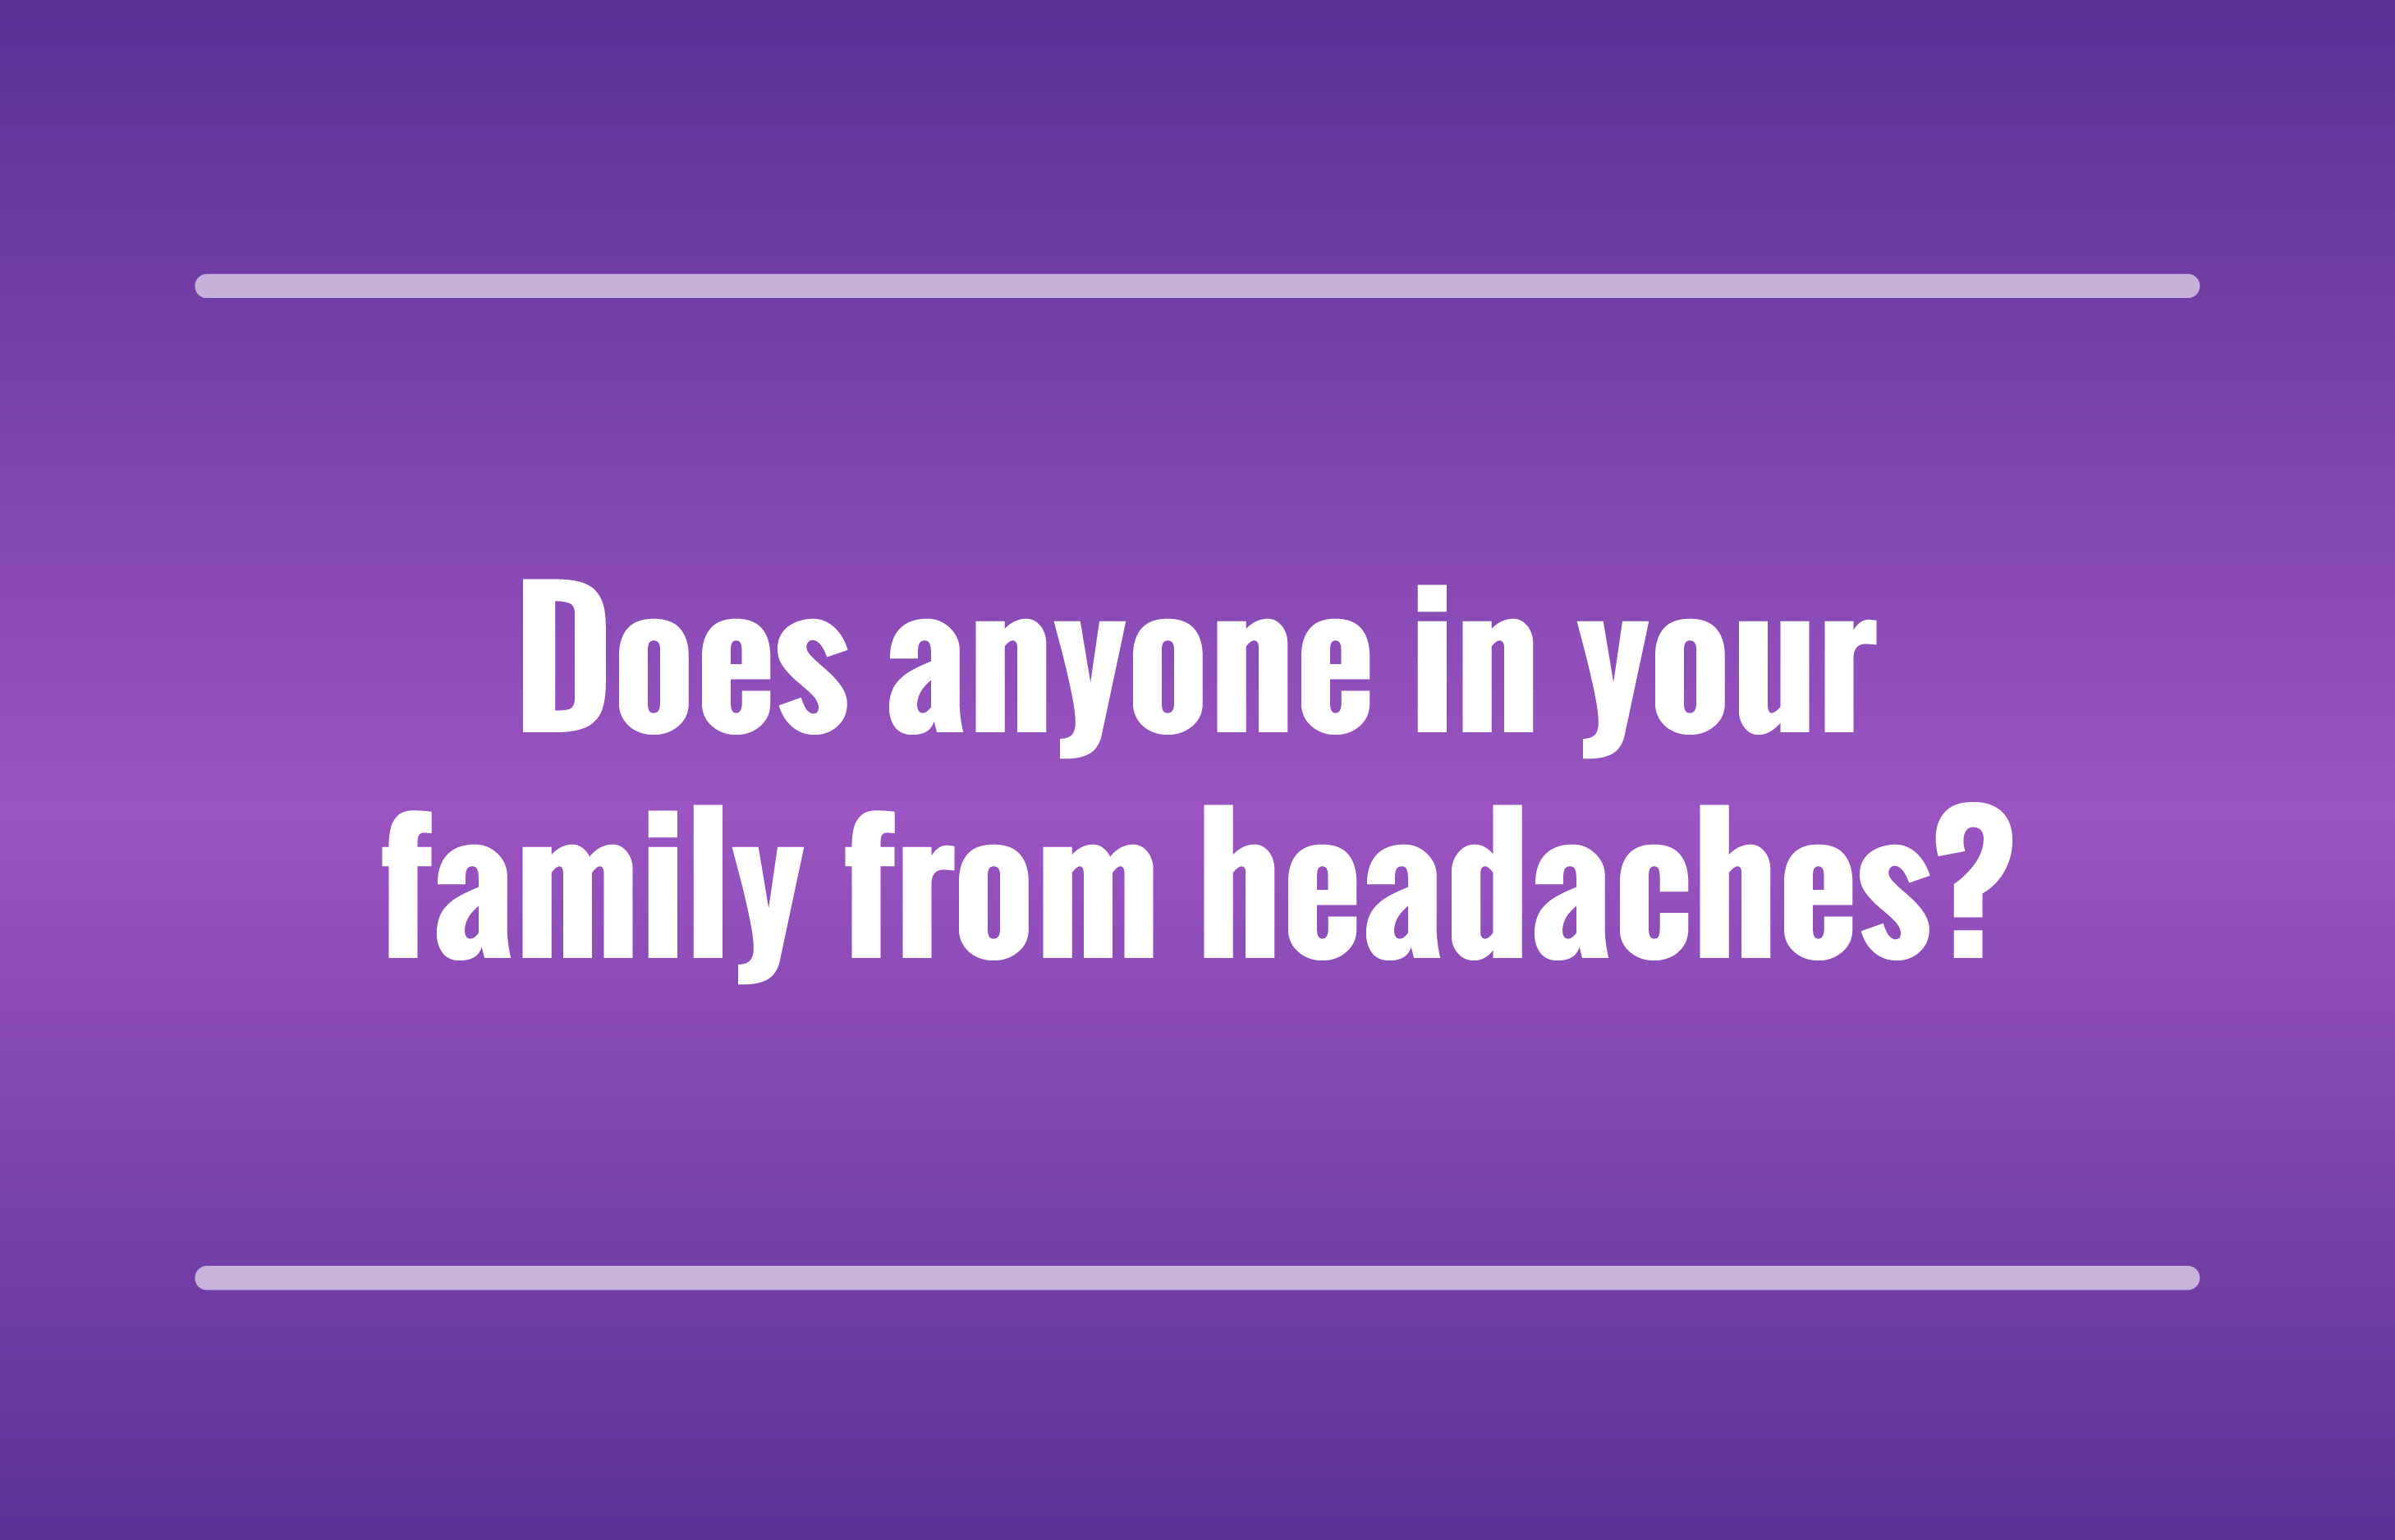 Does anyone in your family from headaches?